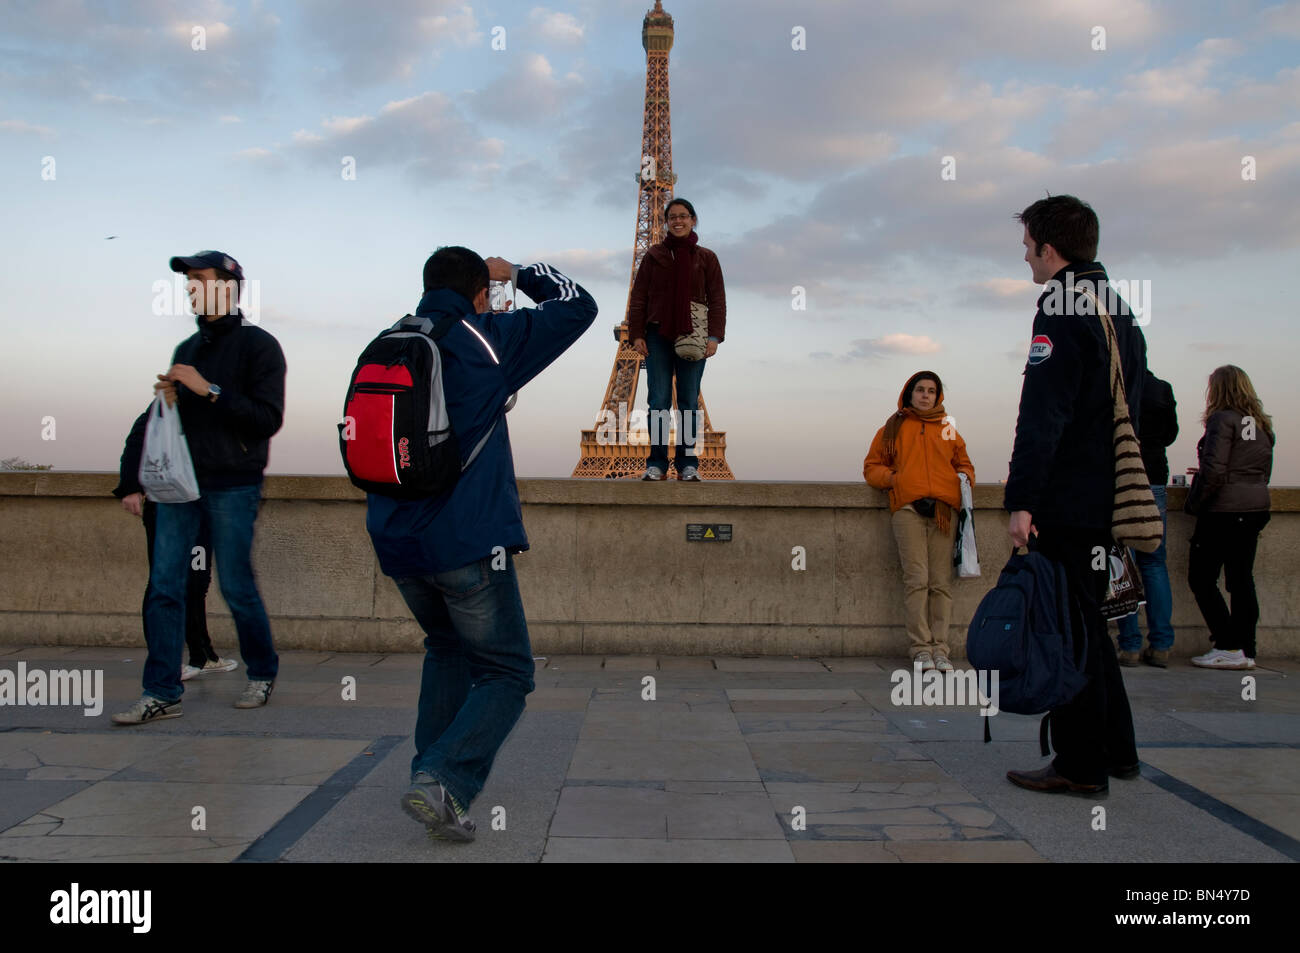 Tourists Visiting the Eiffel Tower, View form Trocadero Plaza, Paris, France, Man Taking Photos Posing Stock Photo